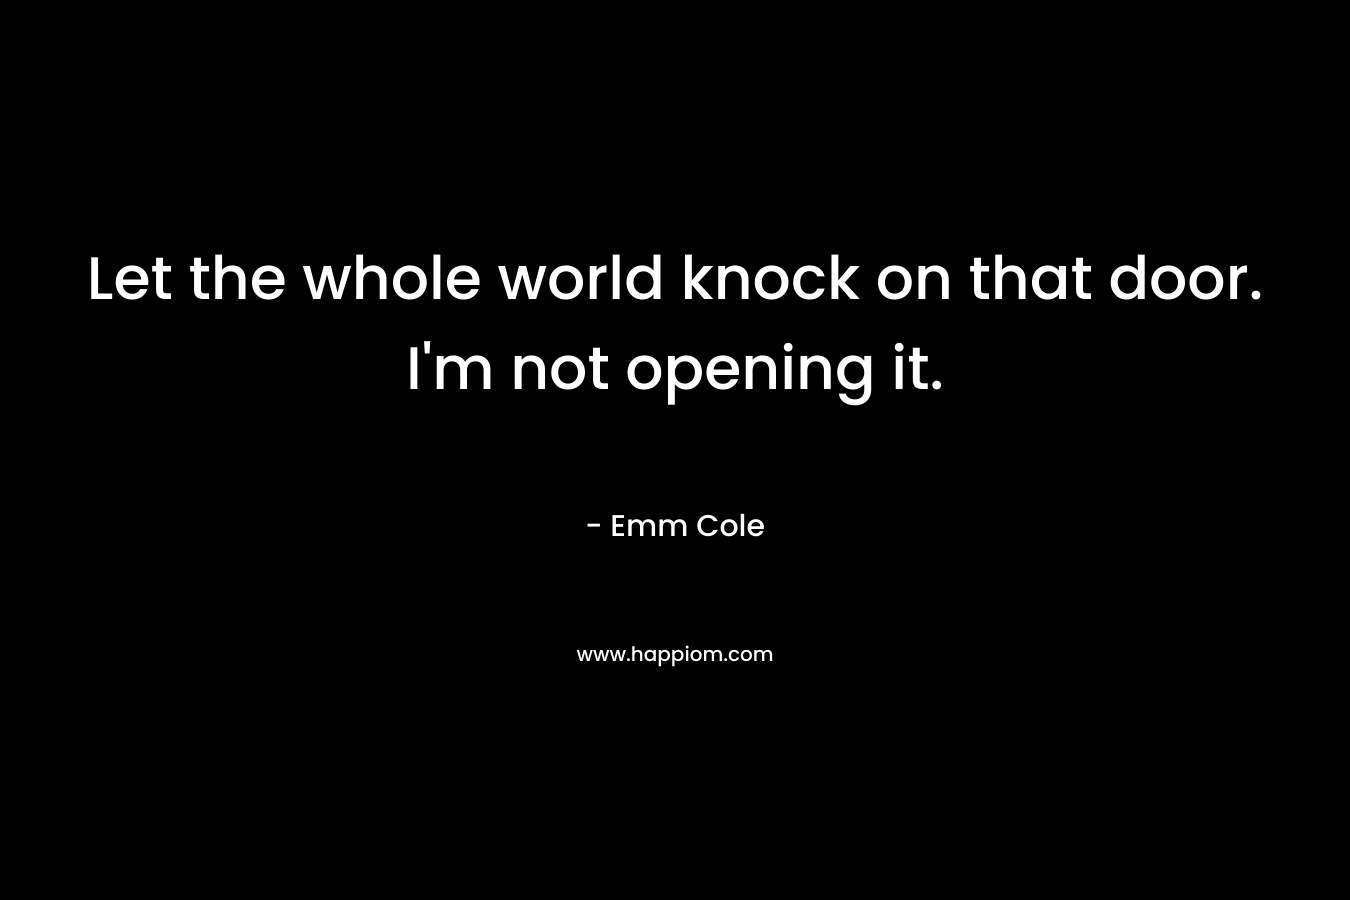 Let the whole world knock on that door. I’m not opening it. – Emm Cole